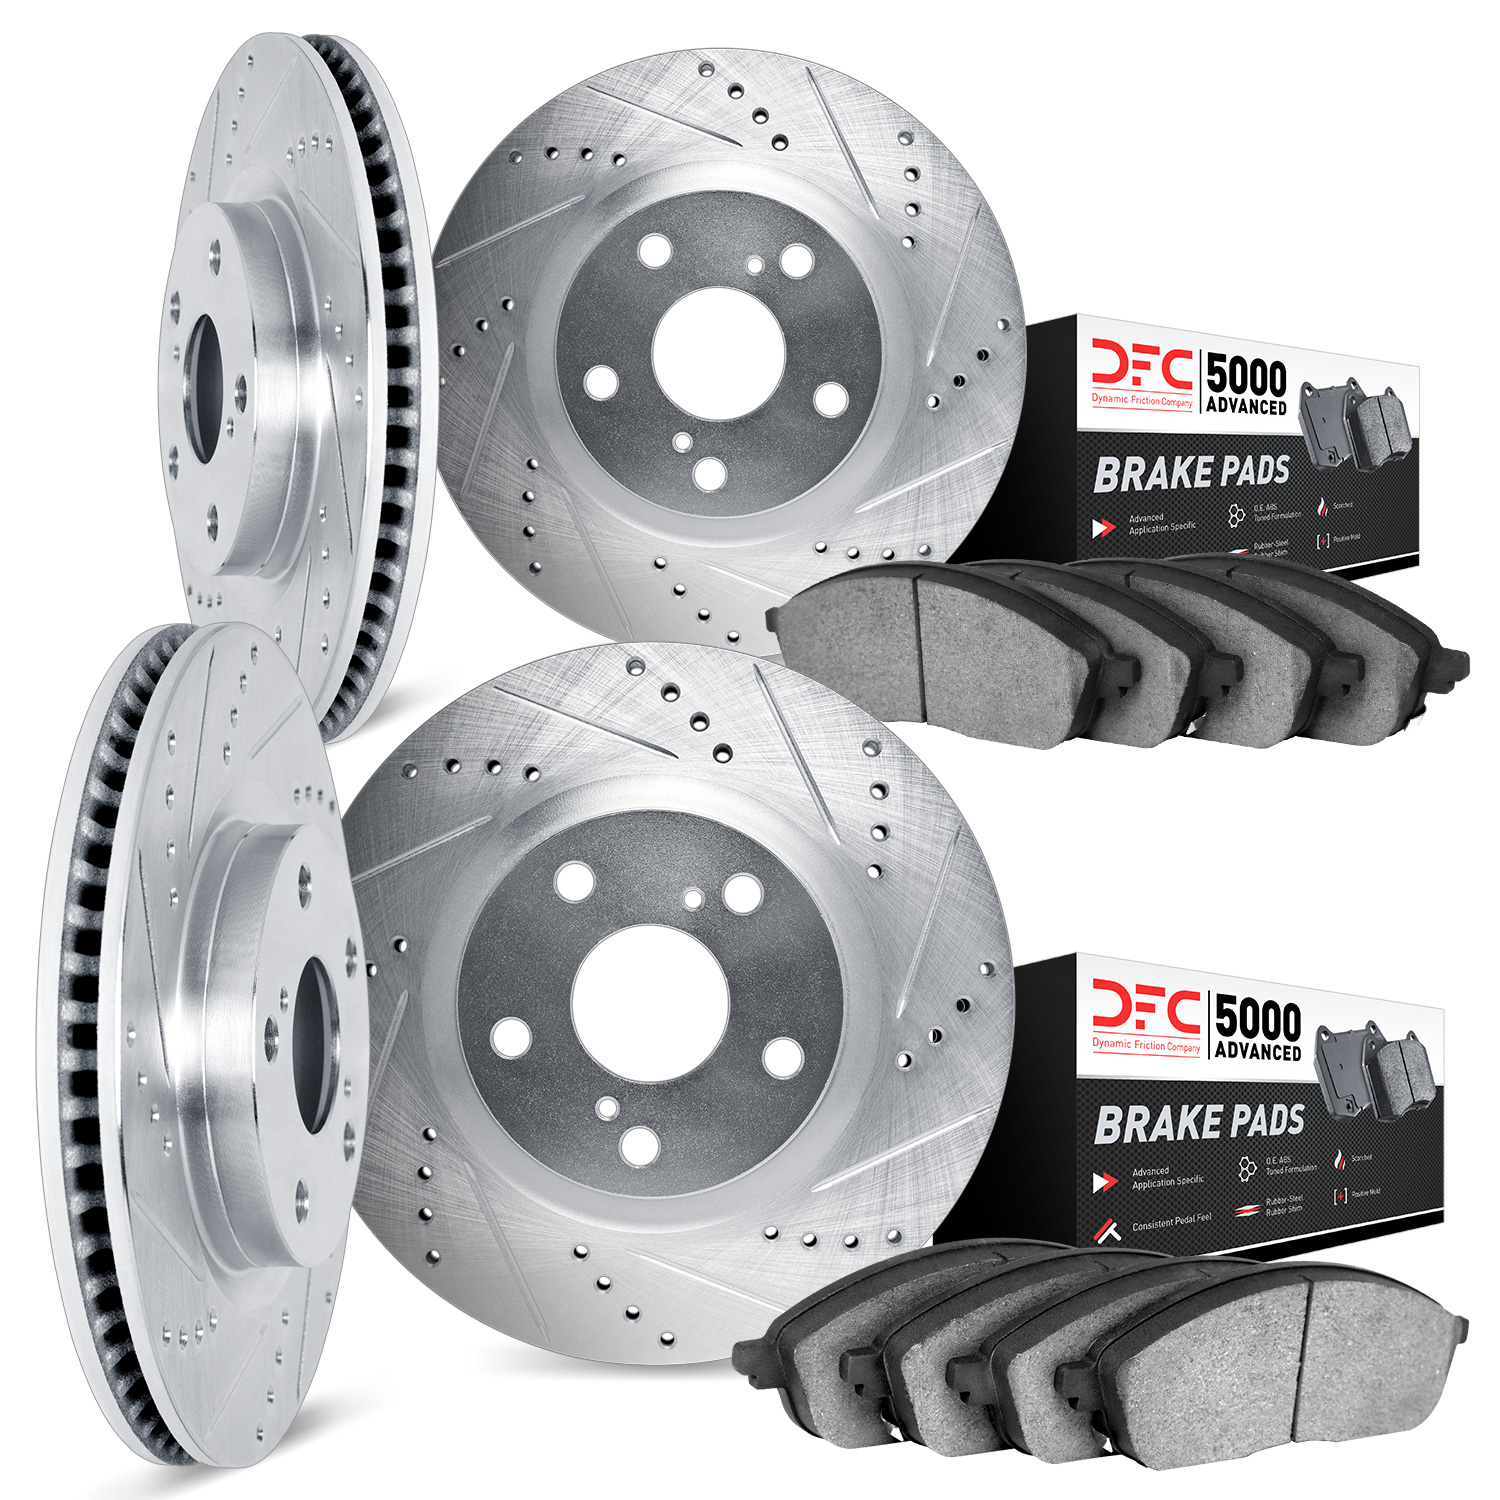 7504-42051 Drilled/Slotted Brake Rotors w/5000 Advanced Brake Pads Kit [Silver], 2006-2010 Mopar, Position: Front and Rear